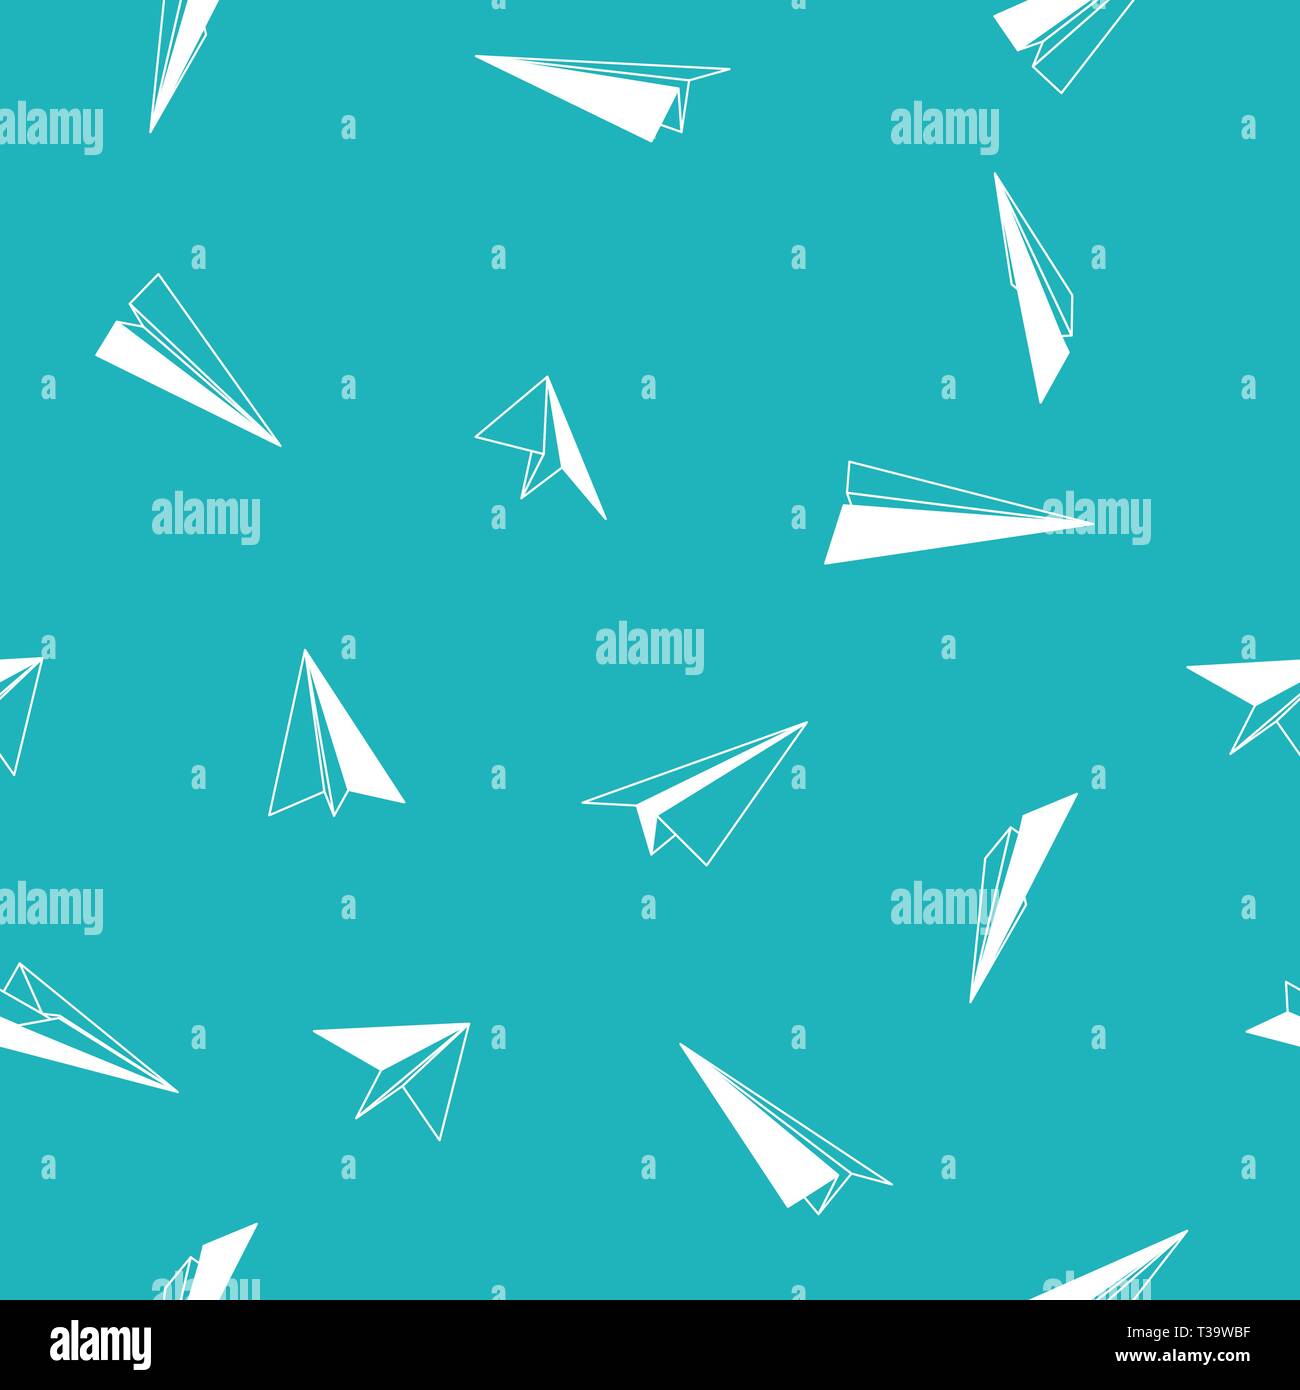 Paper planes seamless pattern. Blue background with different views of paper planes. Stock Vector